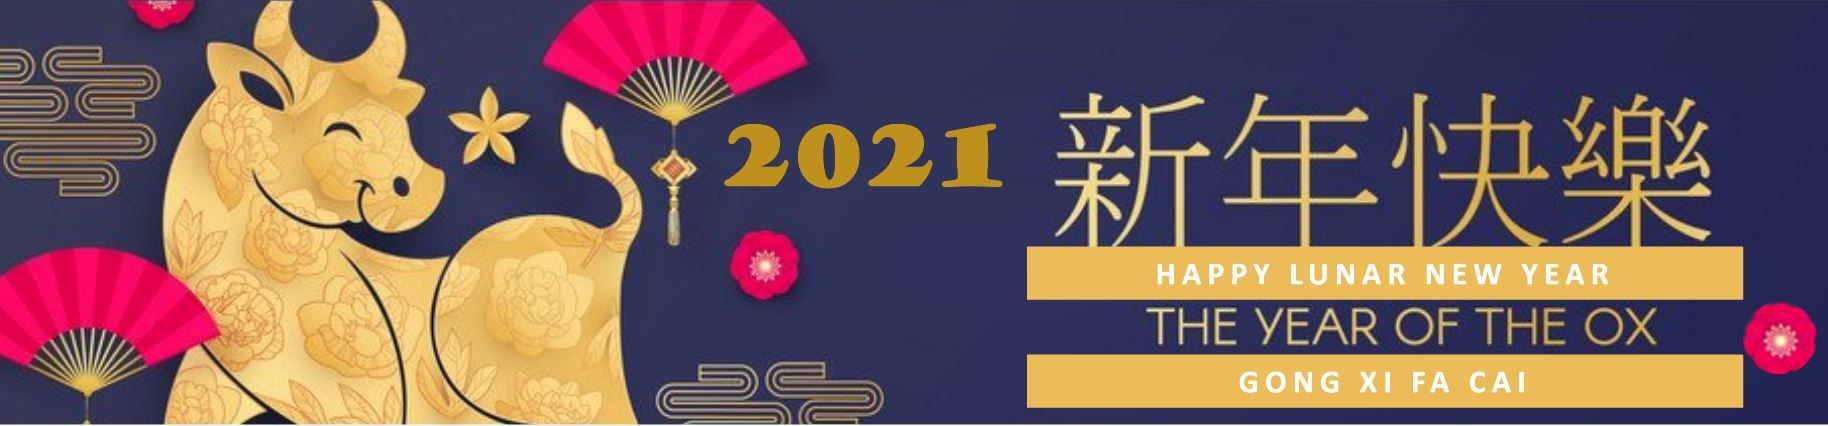 2021 Lunar New Year (Source: Vector Stock)